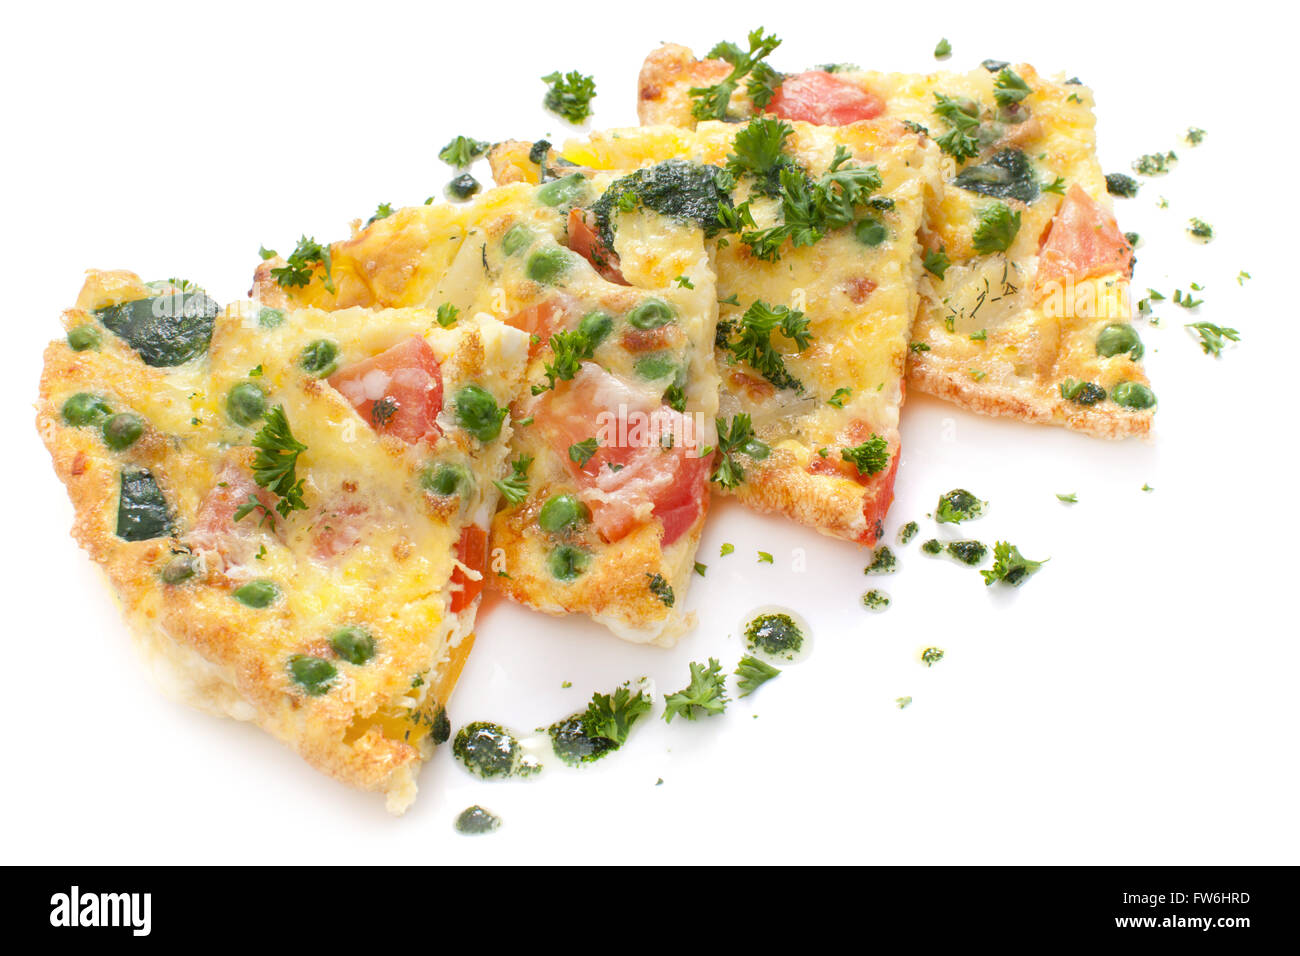 Vegetable and Cheese Omelette, frittata Stock Photo - Alamy